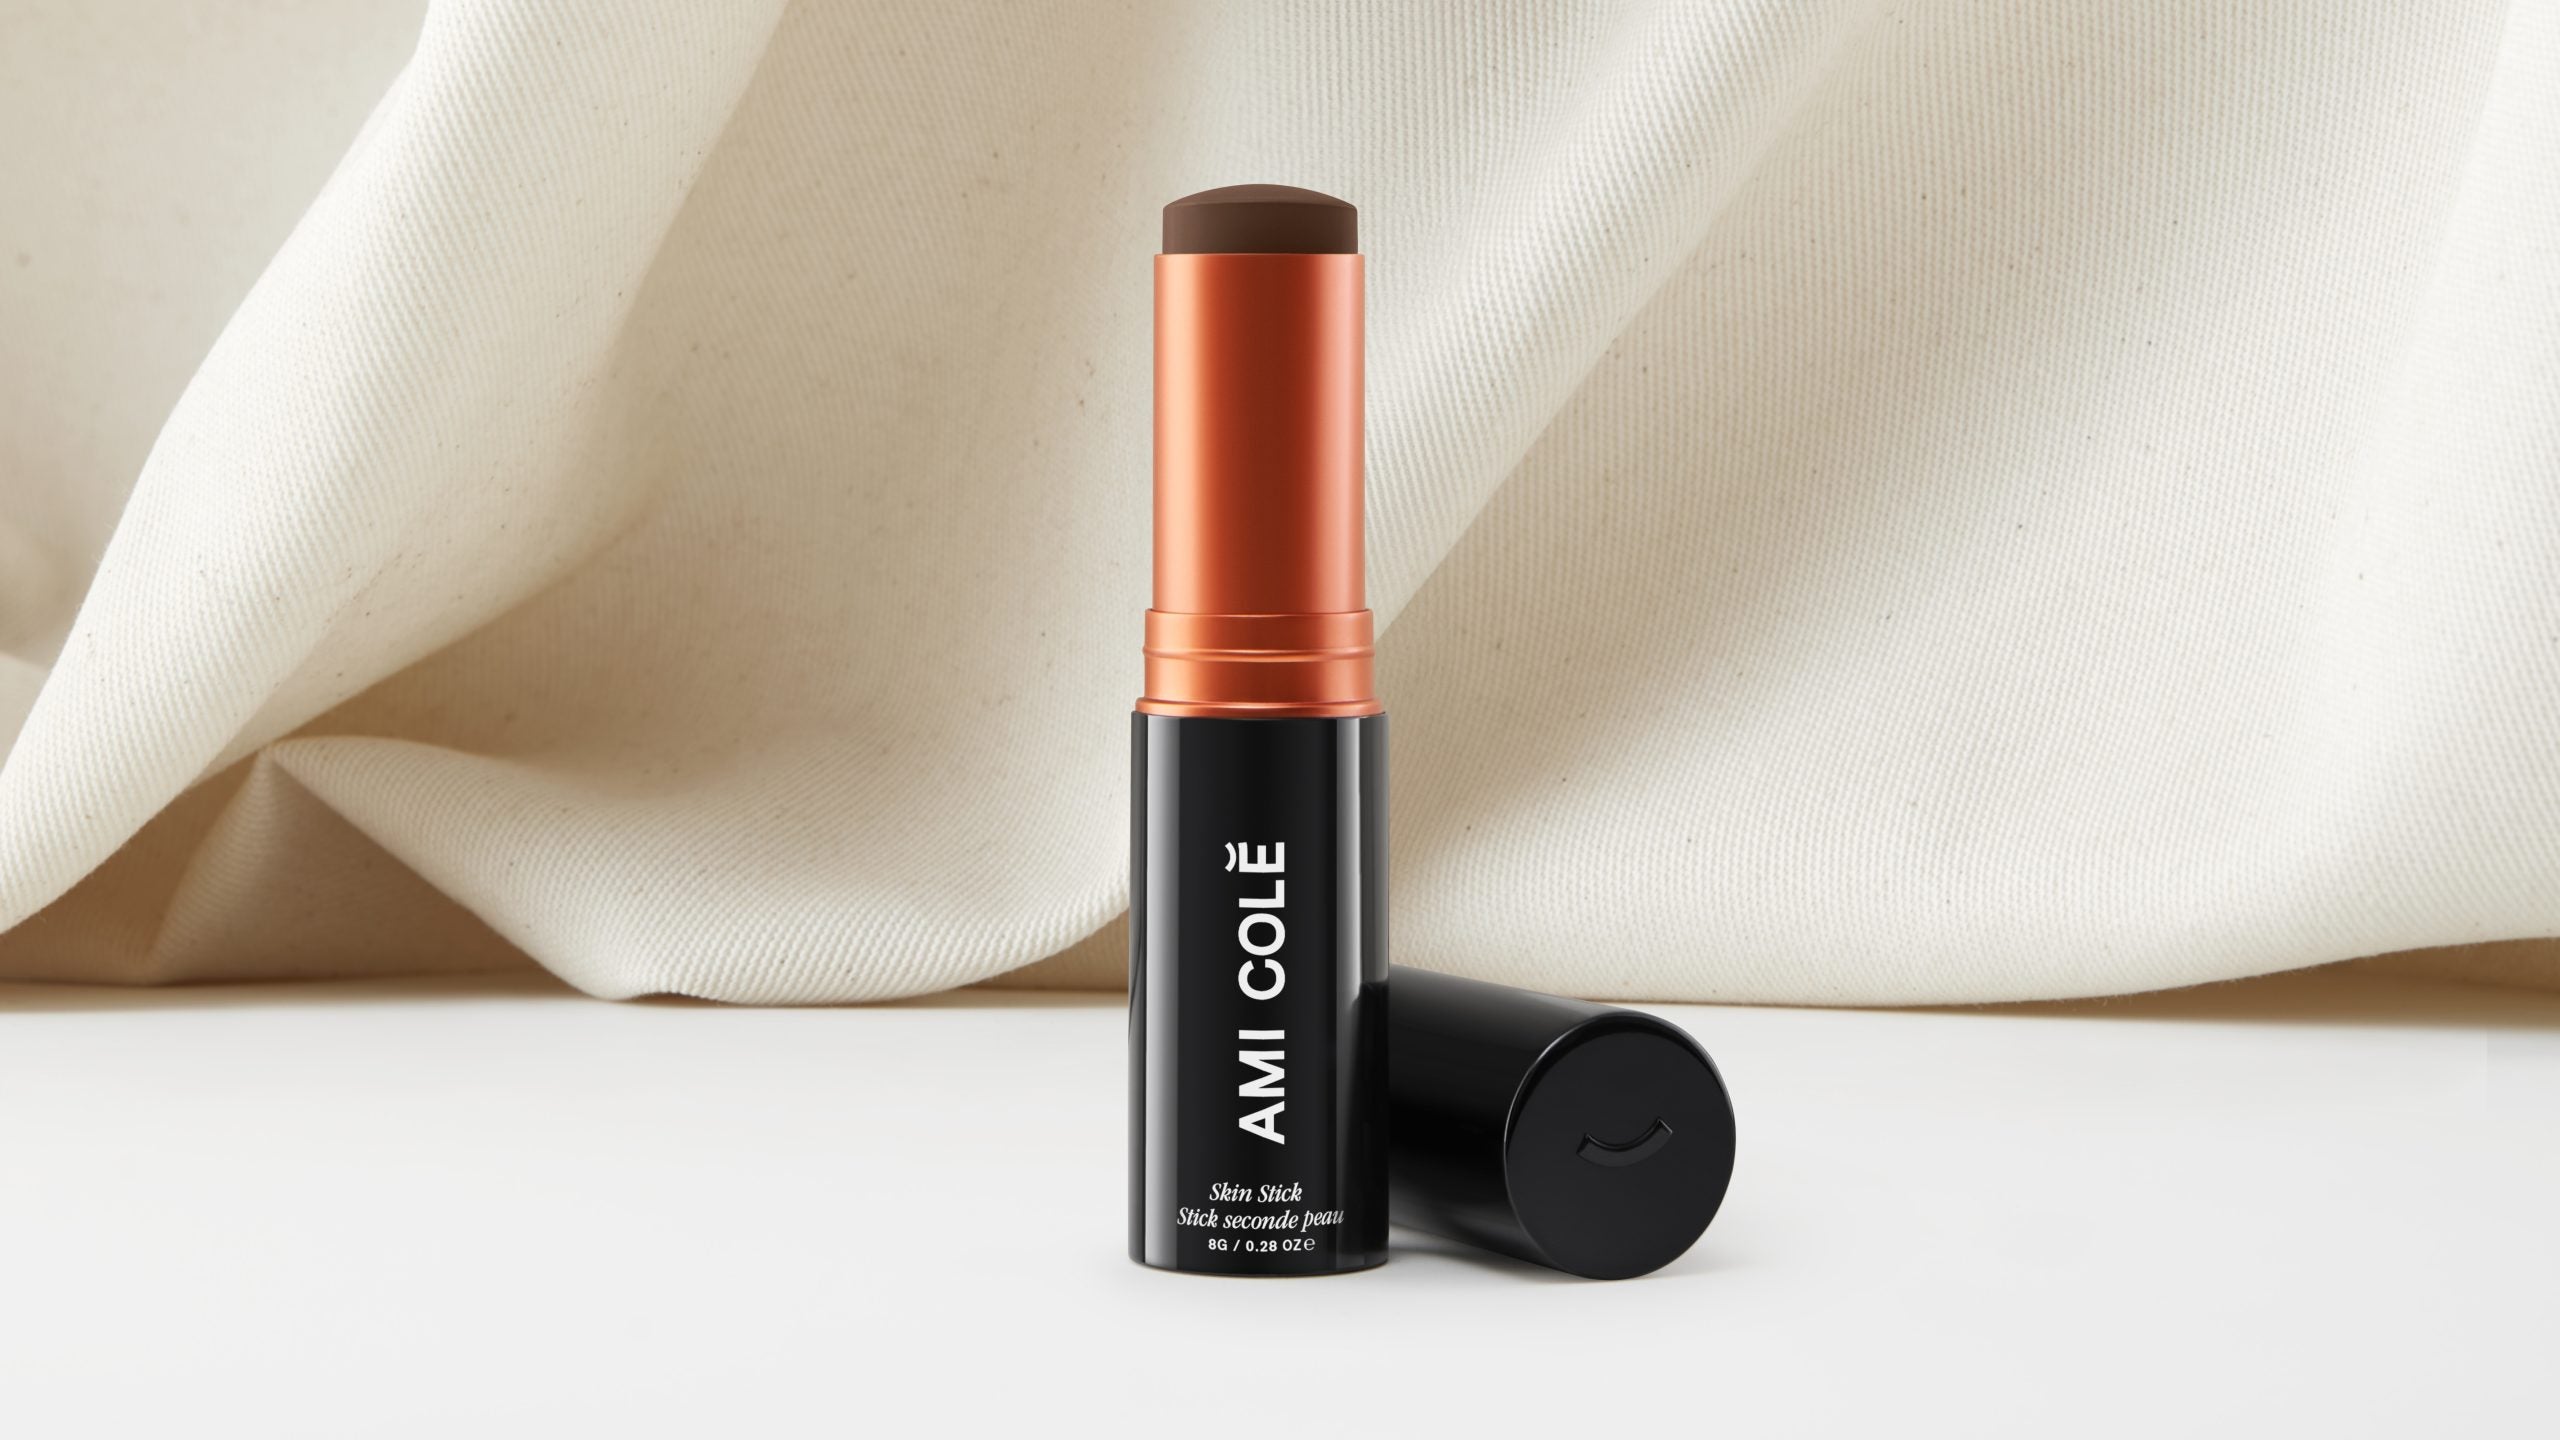 Ami Colé’s Latest Product Will Give You A Lit-From-Within Glow